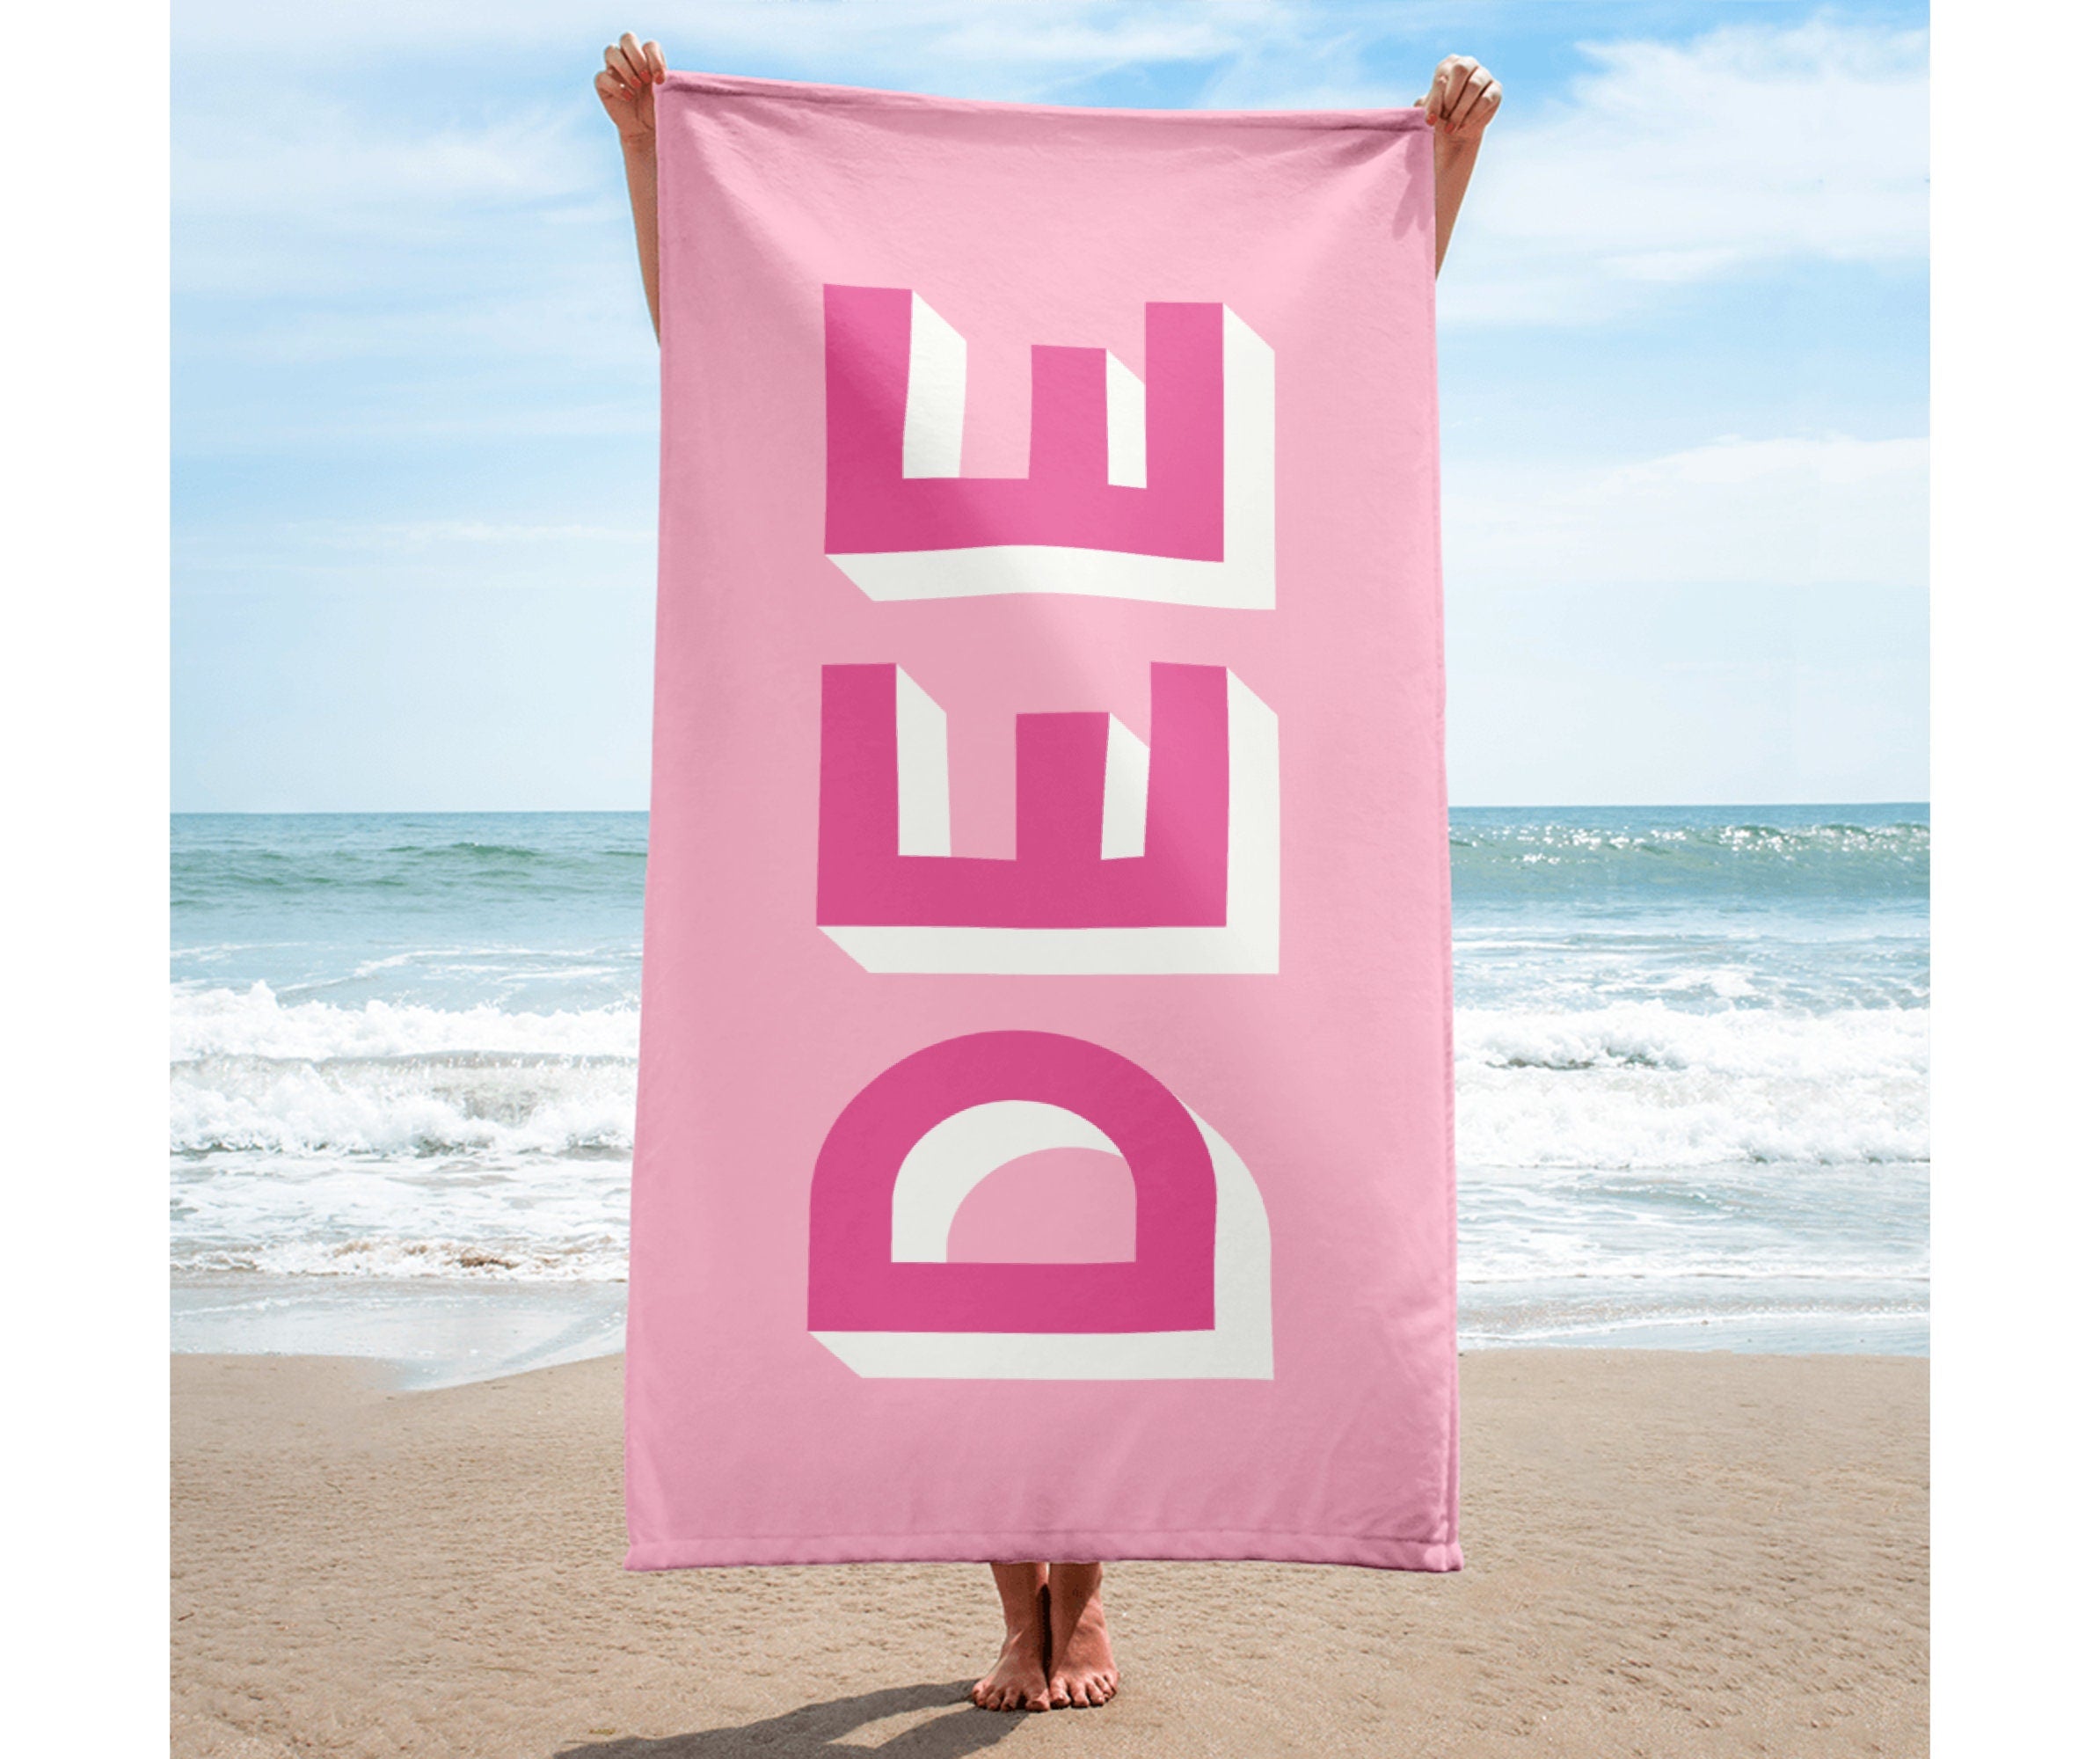 shadow monogram personalized Beach towels, custom beach towel, Personalized Bridesmaid Gift, bachelorette party gift, monogram towel